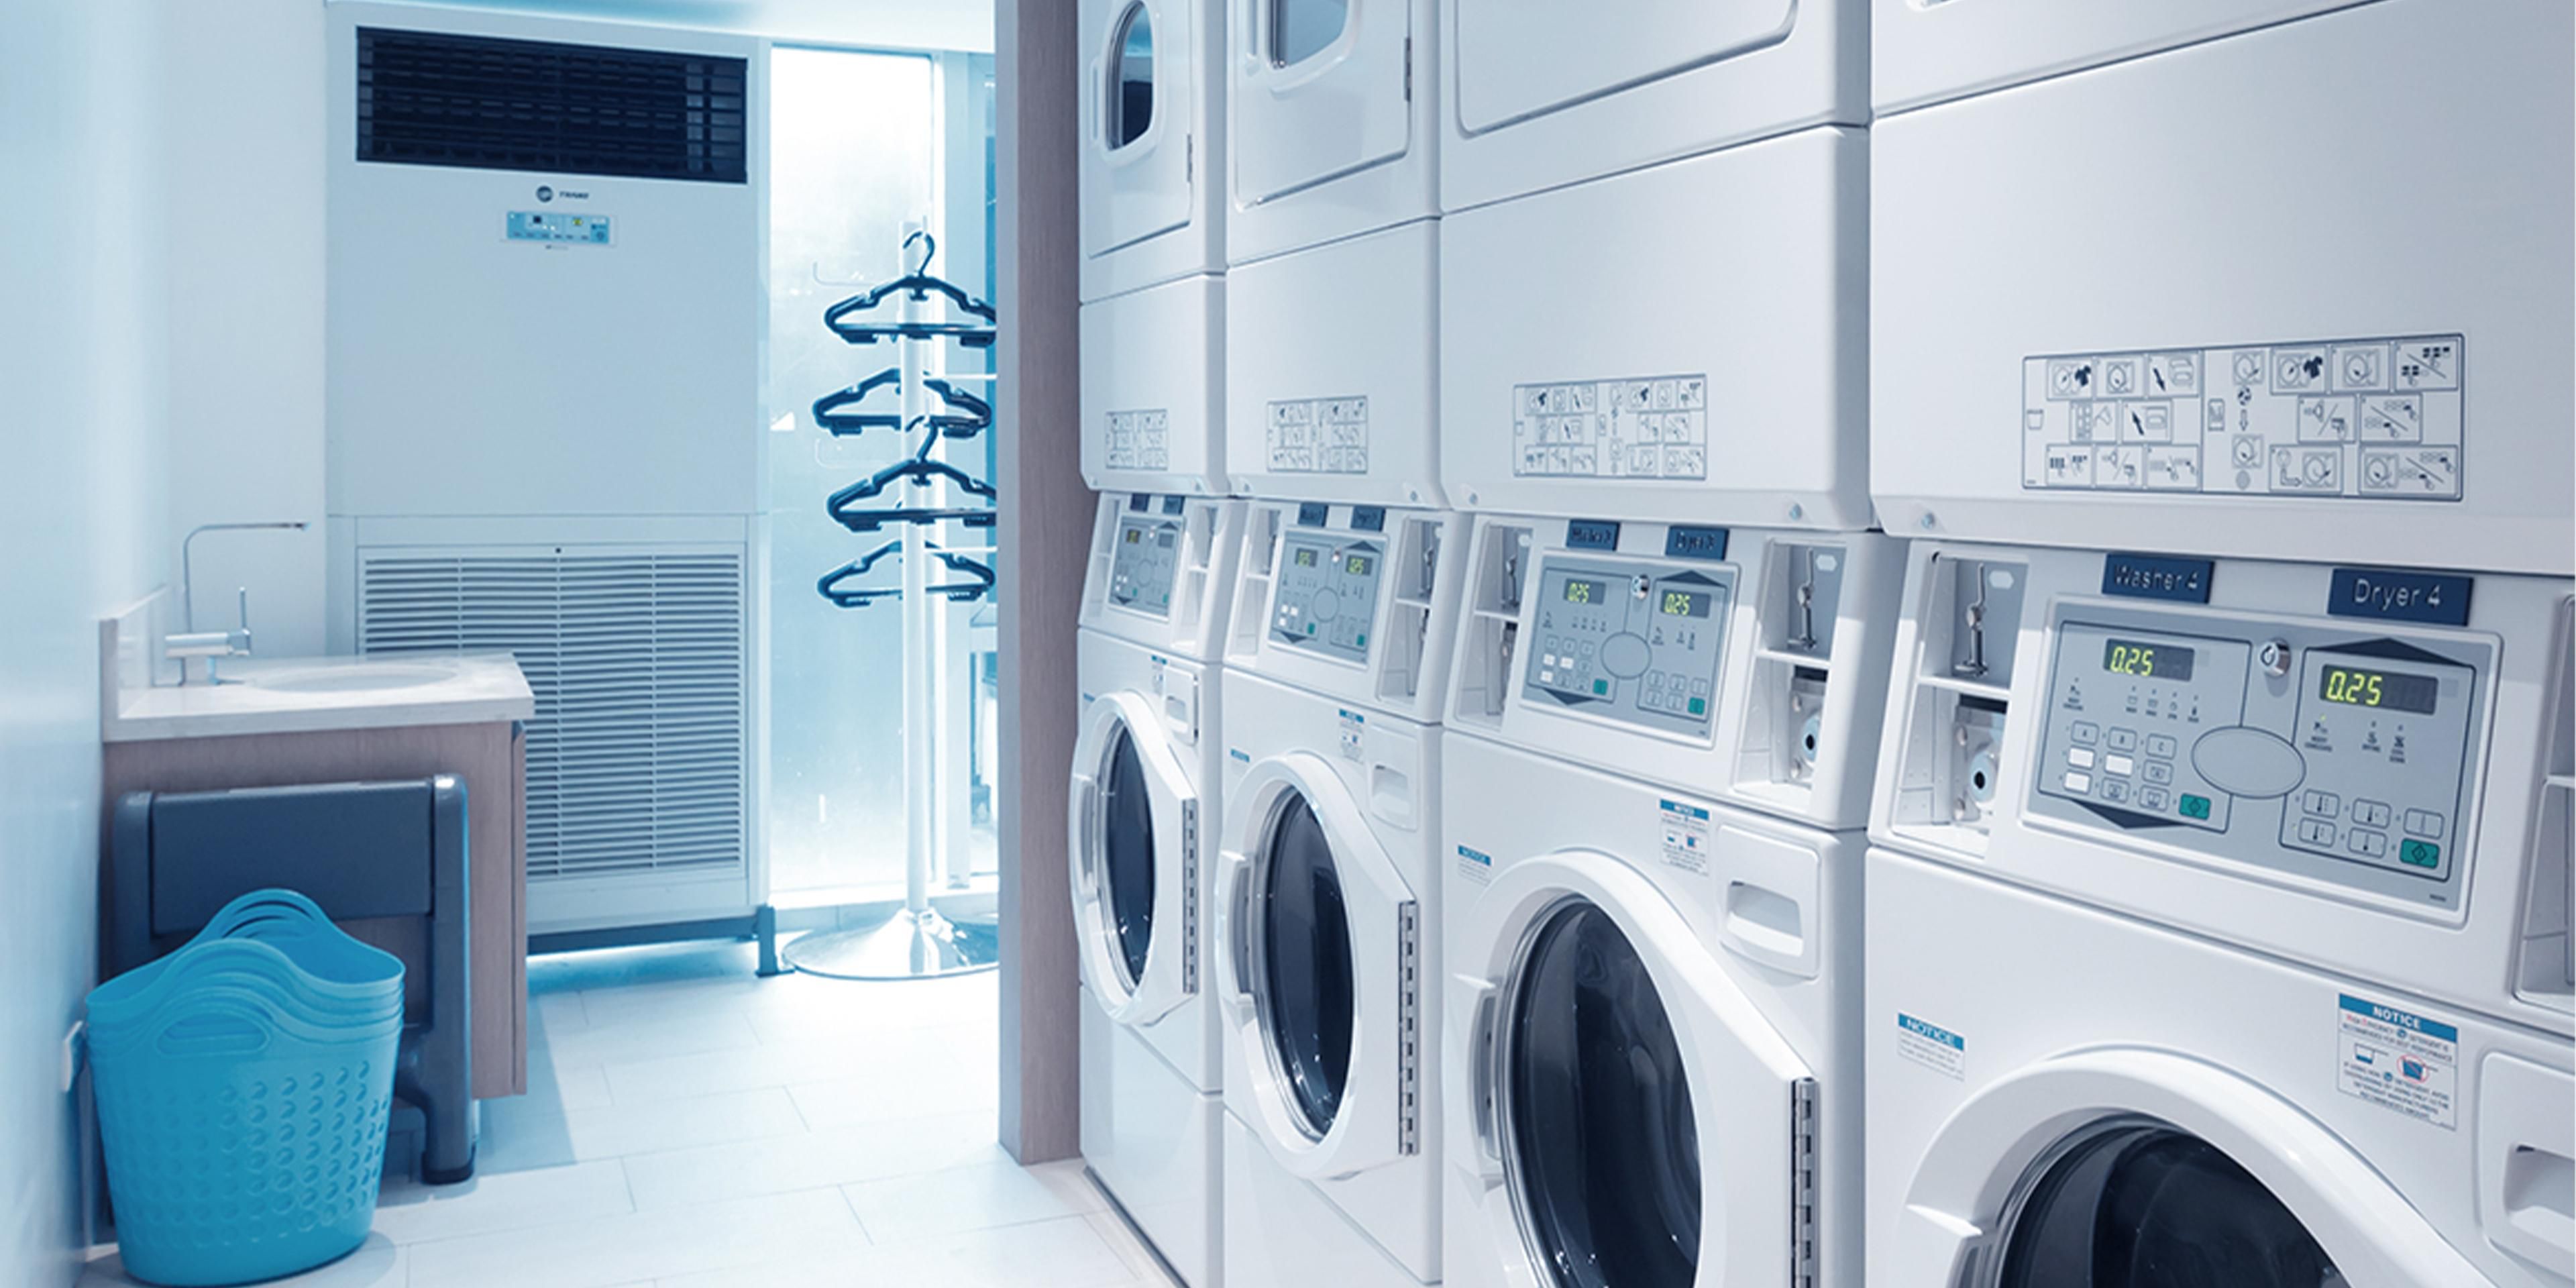 A self-service laundry facility where you can wash, dry and iron your clothes without paying an expensive rate.